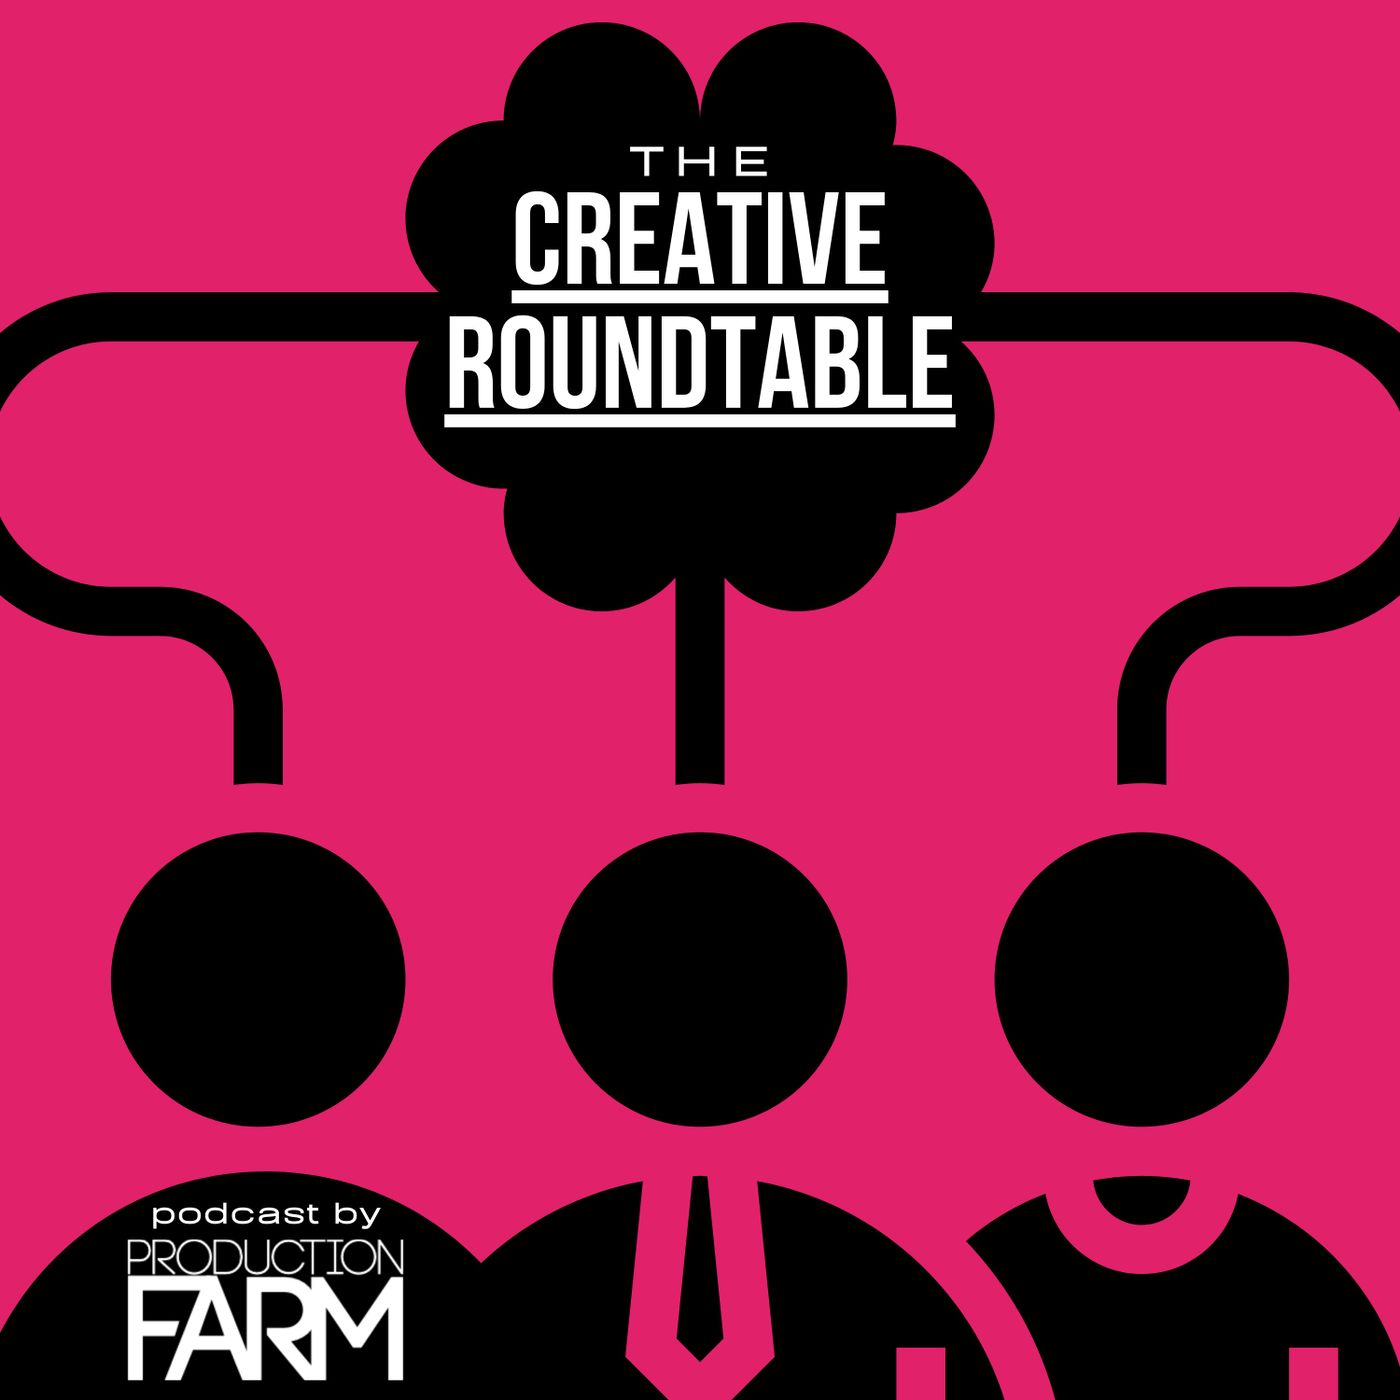 Artwork for podcast The Creative Roundtable